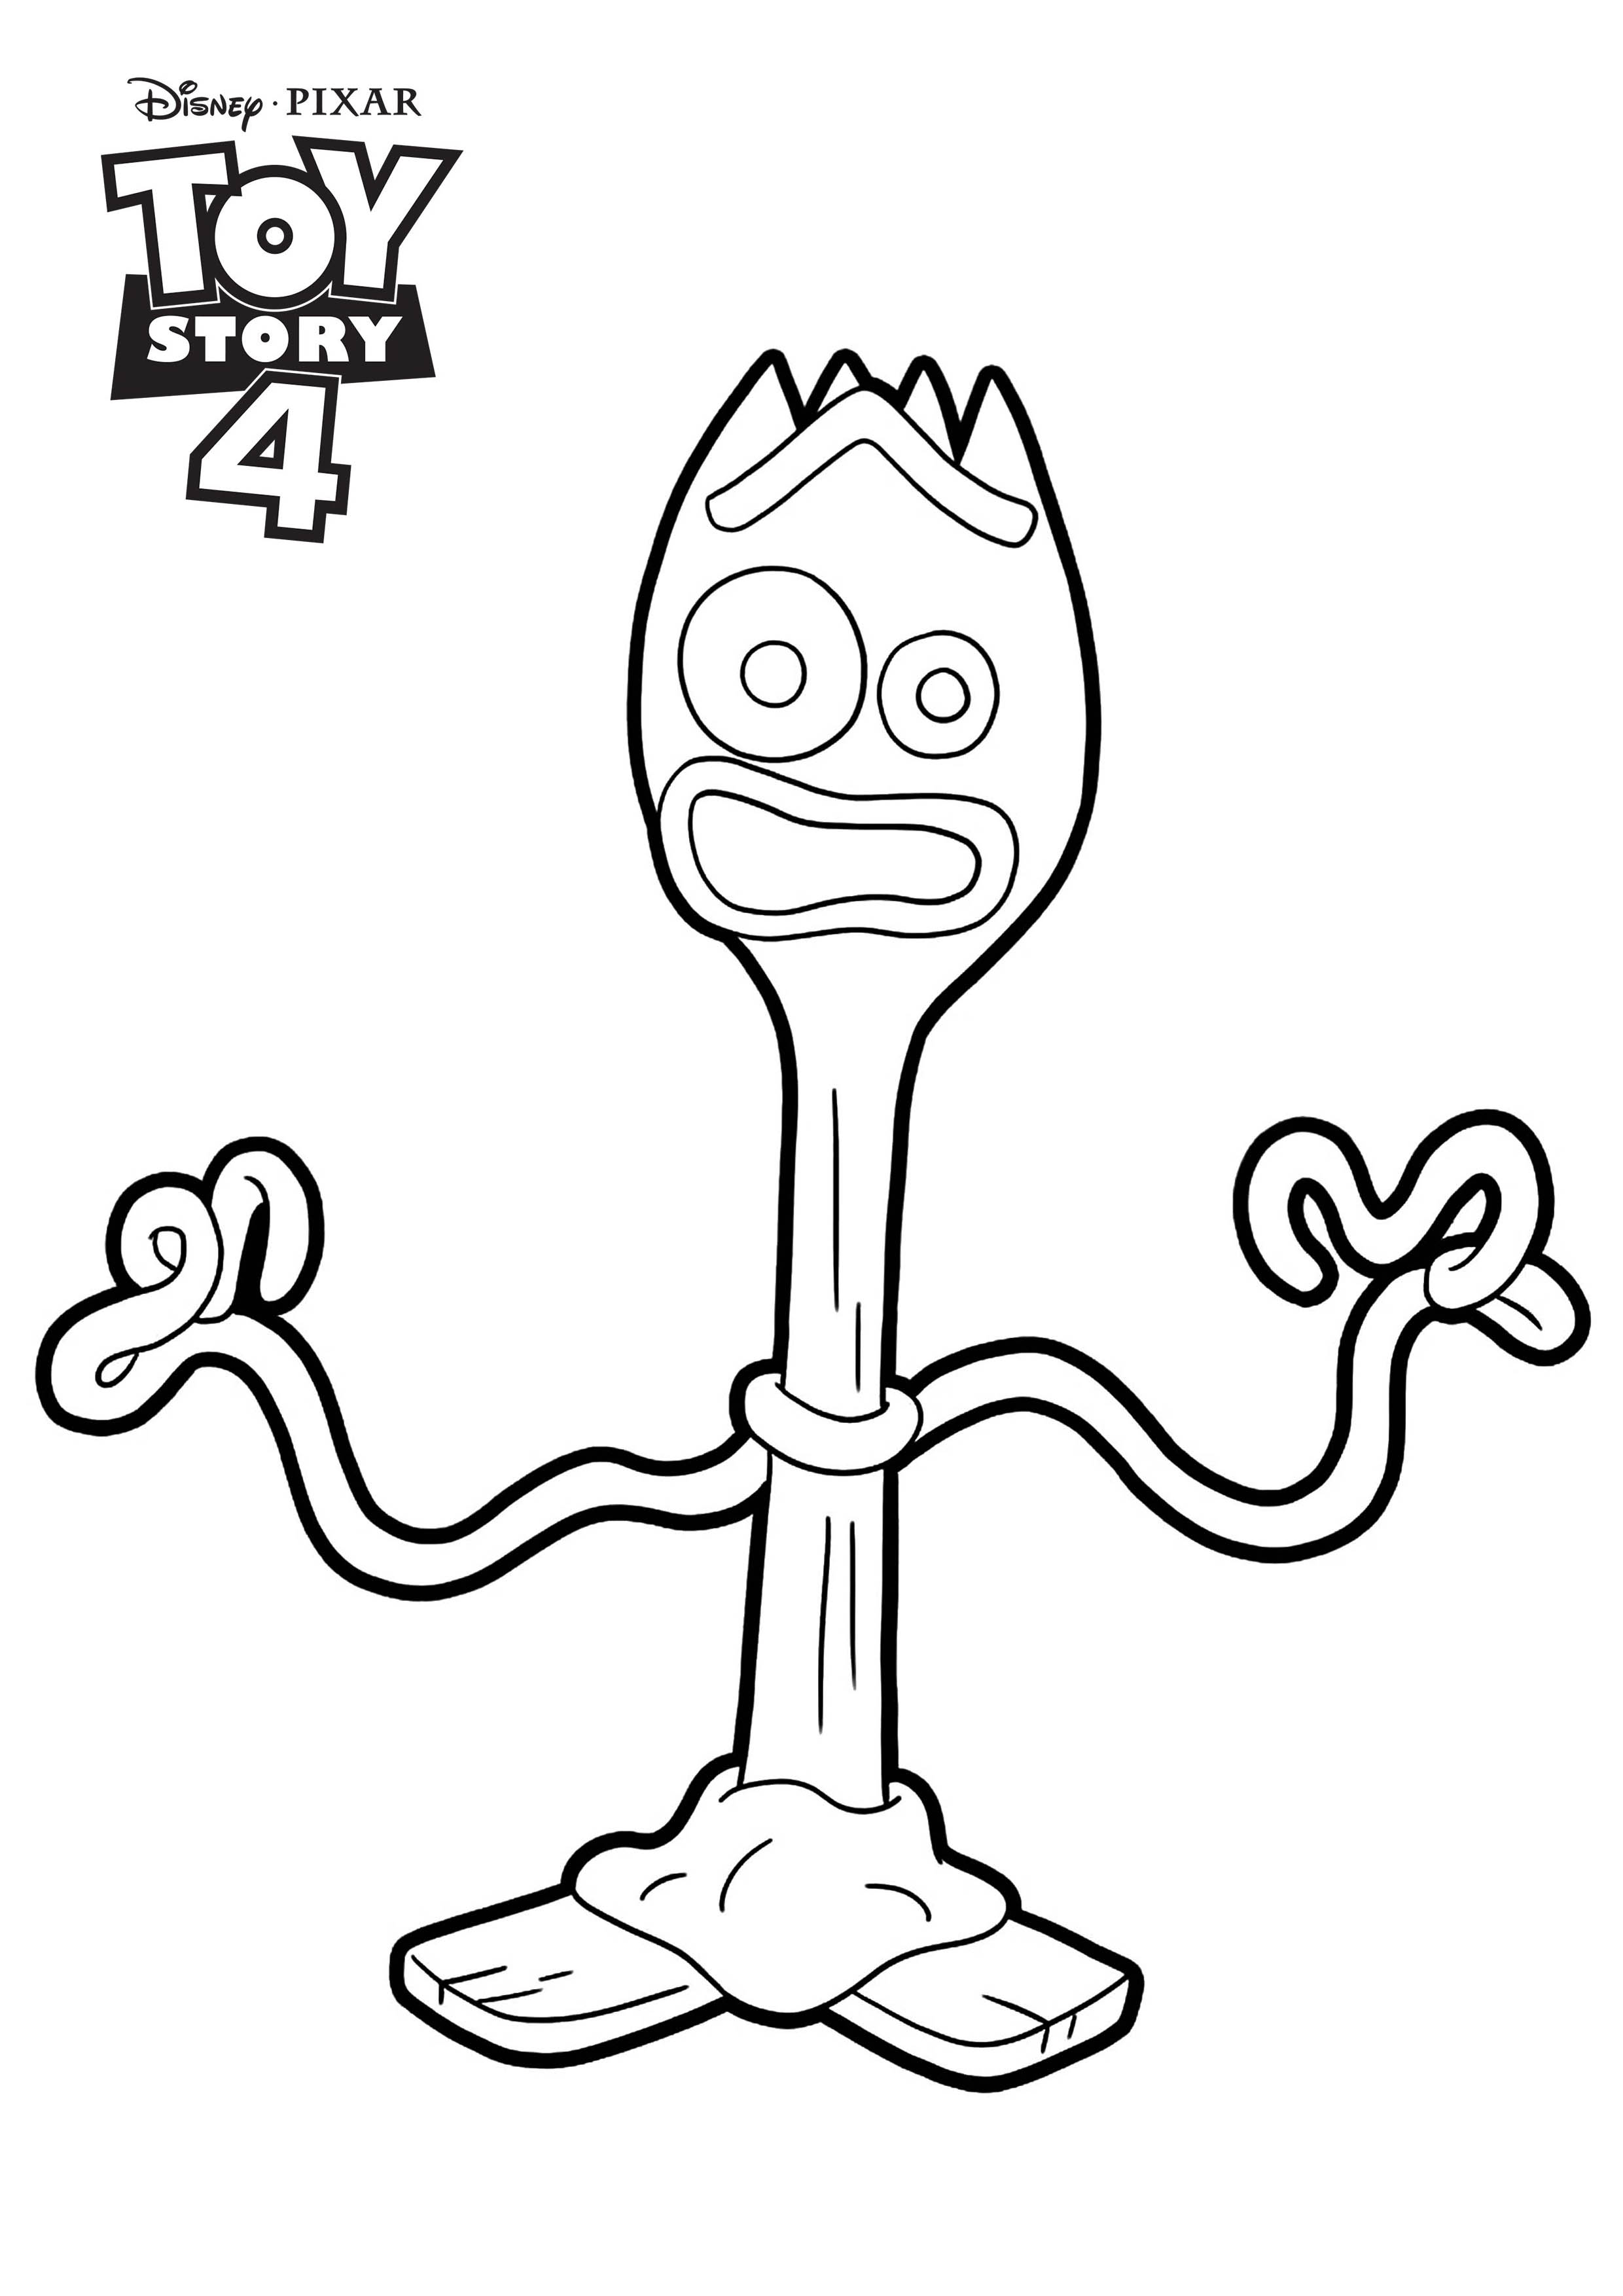 Download Forky : Toy Story 4 coloring page Disney / Pixar - Toy ...